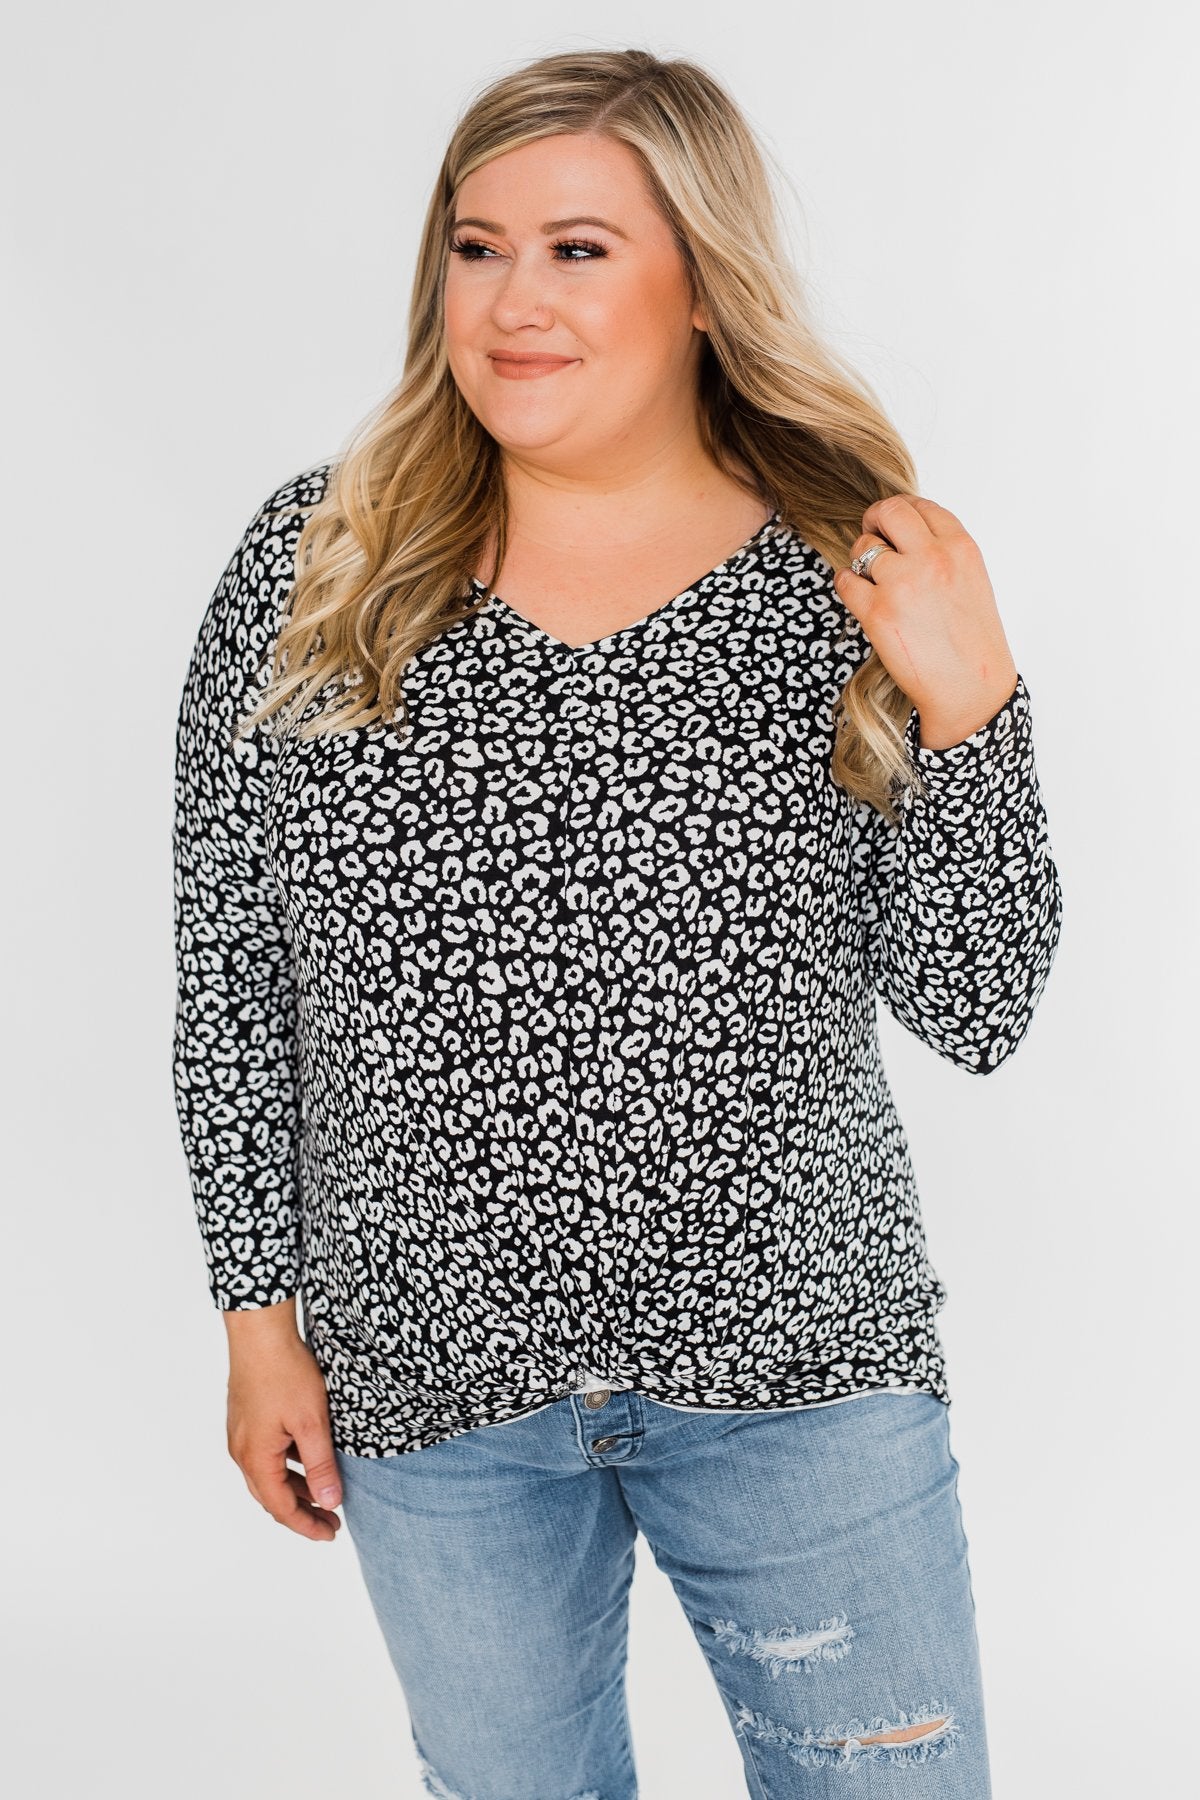 For a Little While Leopard Twist Top- Black